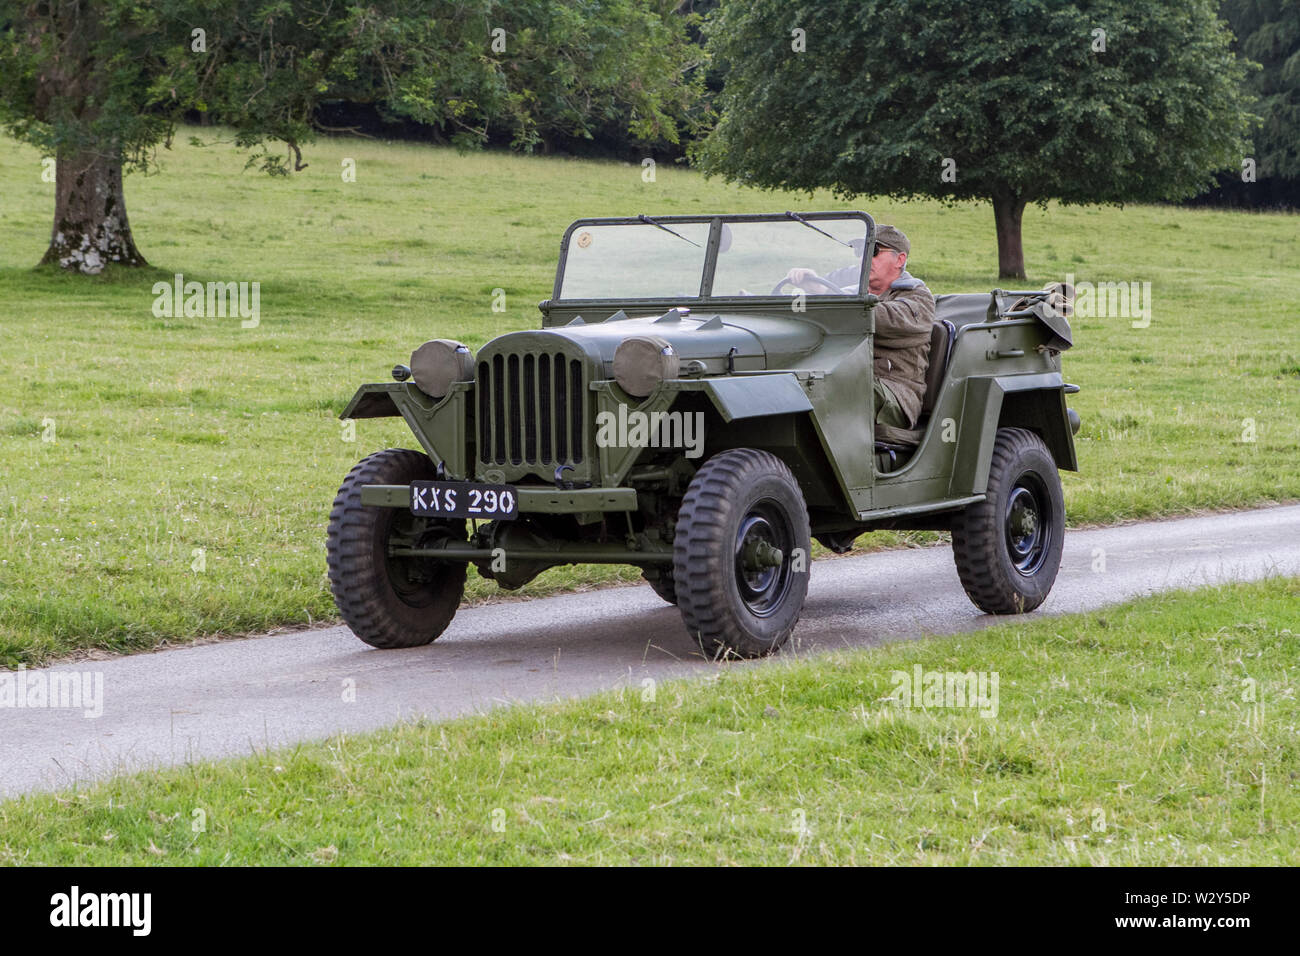 KXS 290 military jeep 4x4 Vintage classic restored vehicles appearing at the Leighton hall car festival in Carnforth, Lancaster, UK Stock Photo